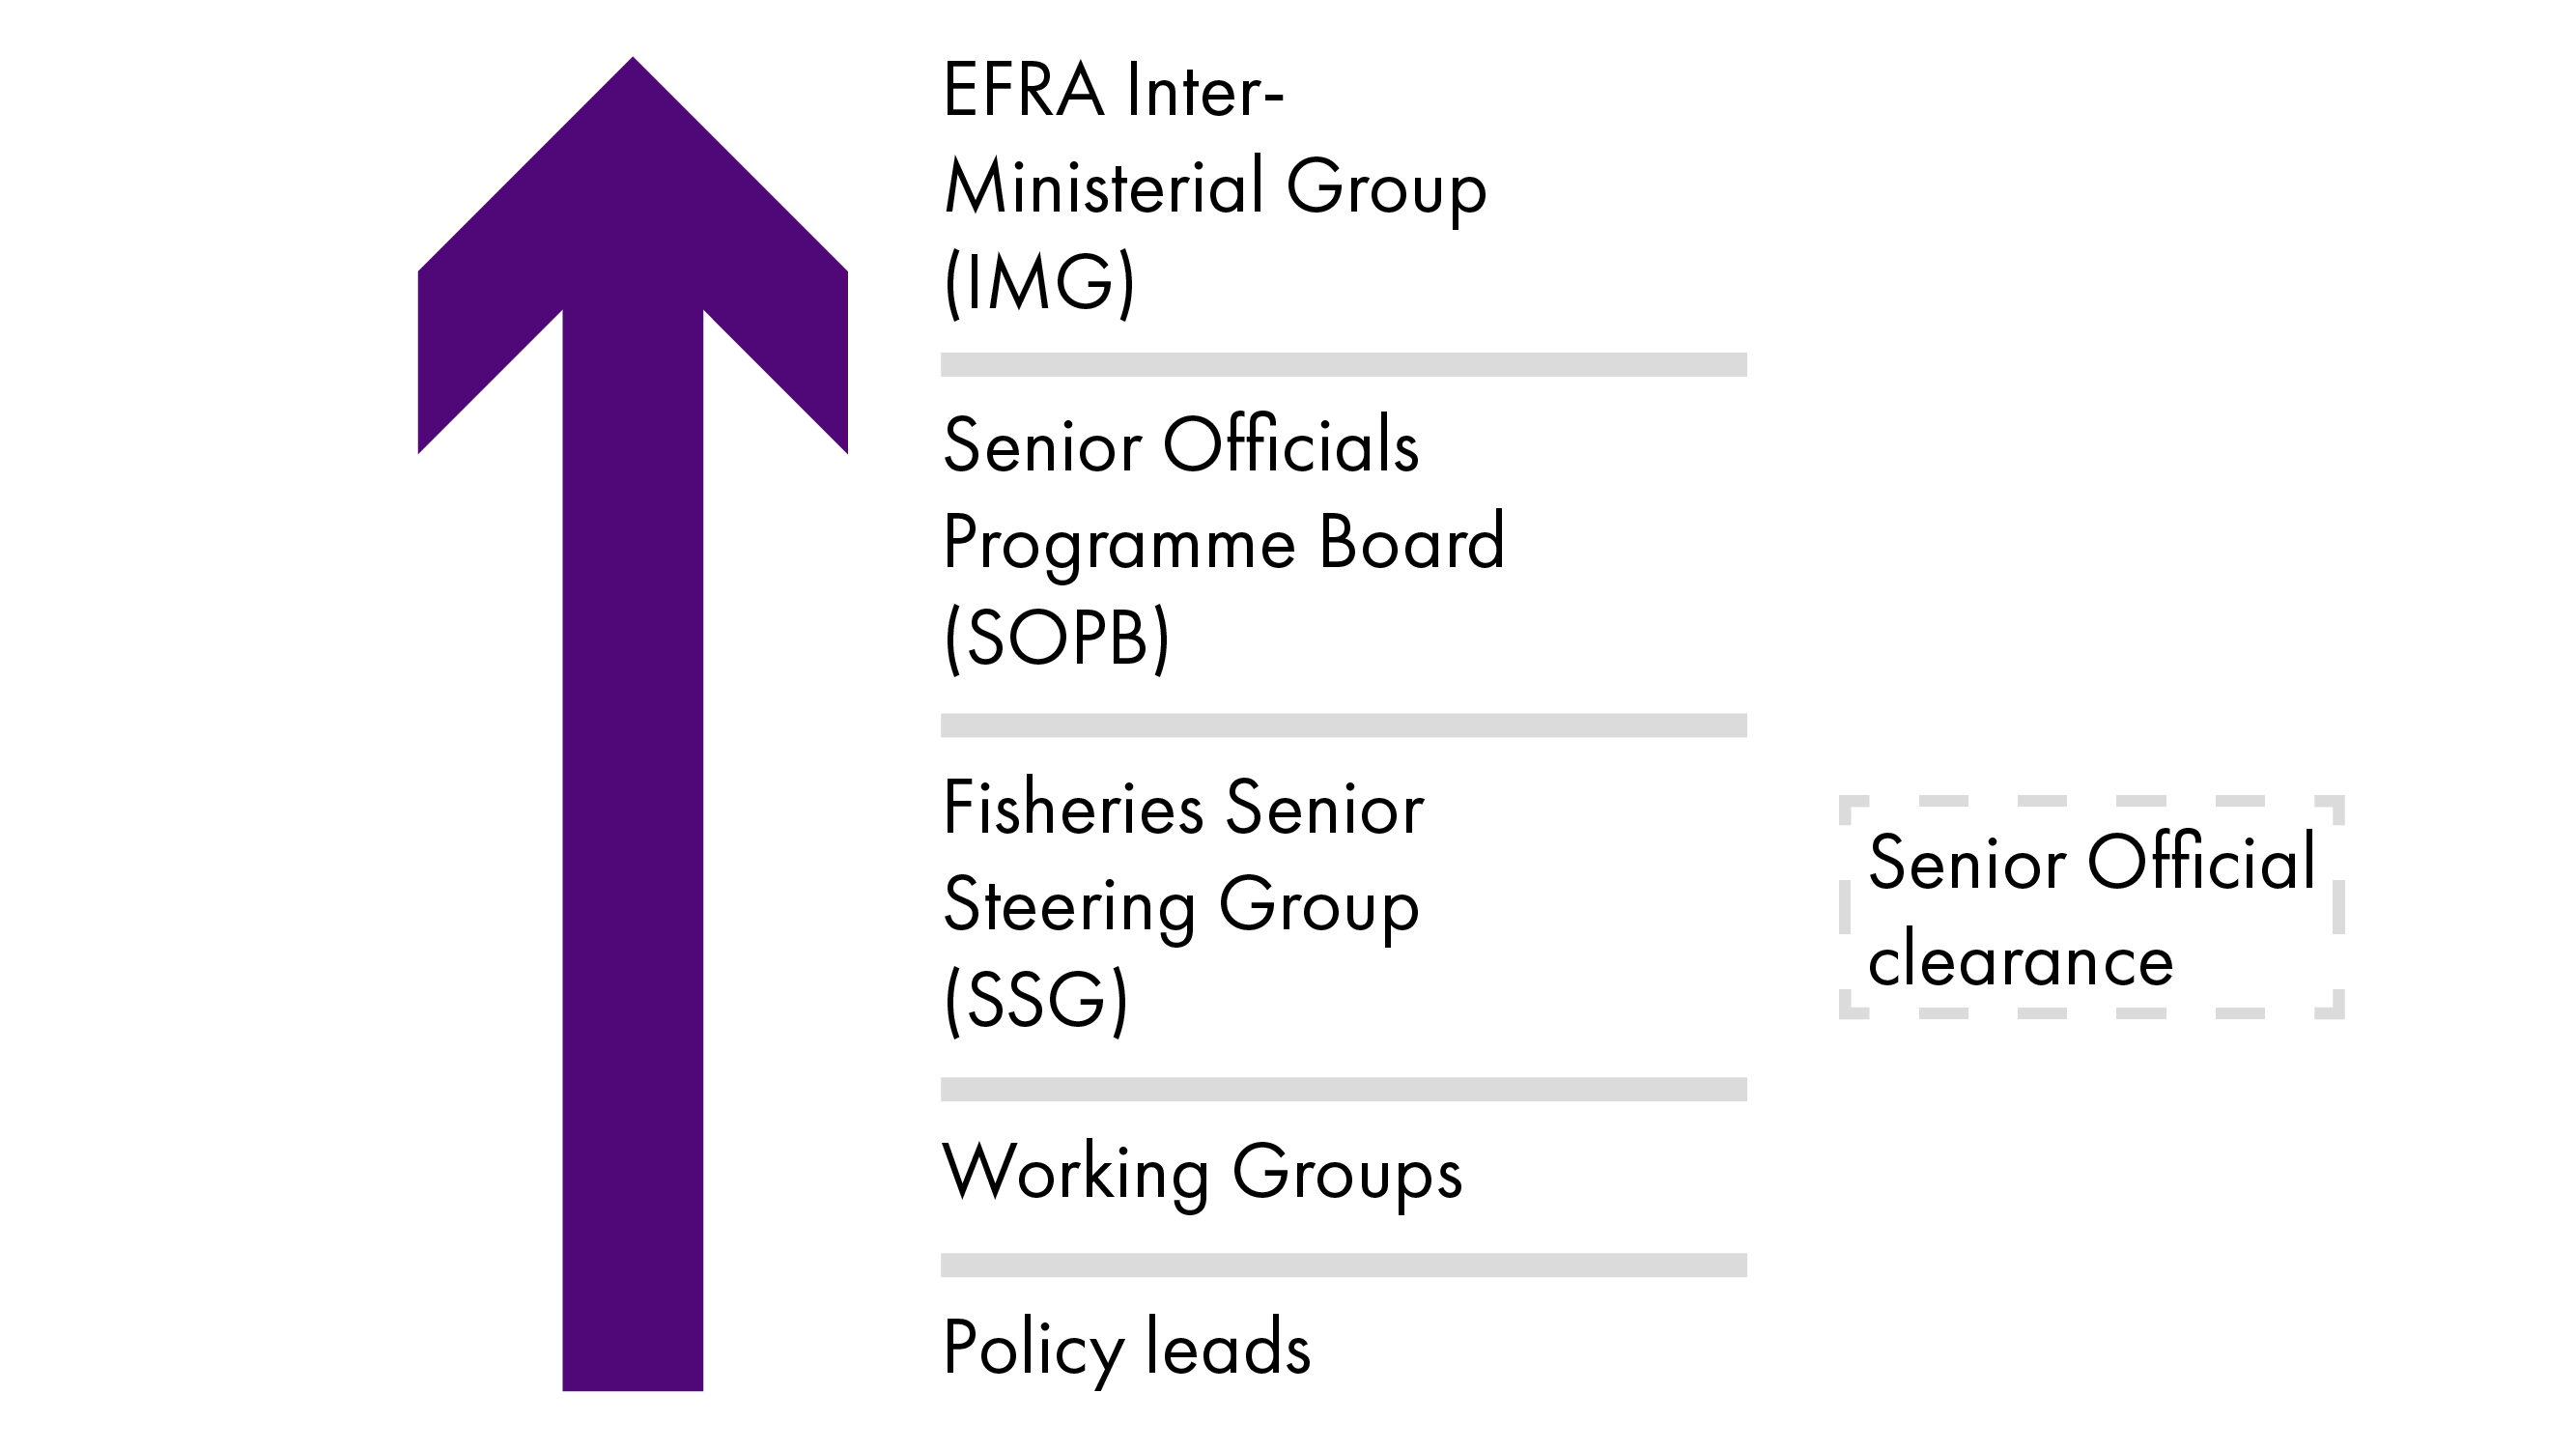 The diagram shows a hierarchy of five levels. Starting at the lowest, they are: Policy leads, Working Groups, Fisheries Senior Steering Group (SSG), Senior Officials Programme Board (SOPB) EFRA Interministeral Group (IMG). To the right of the SSG, there is also a box that says 'Senior Official clearance'.